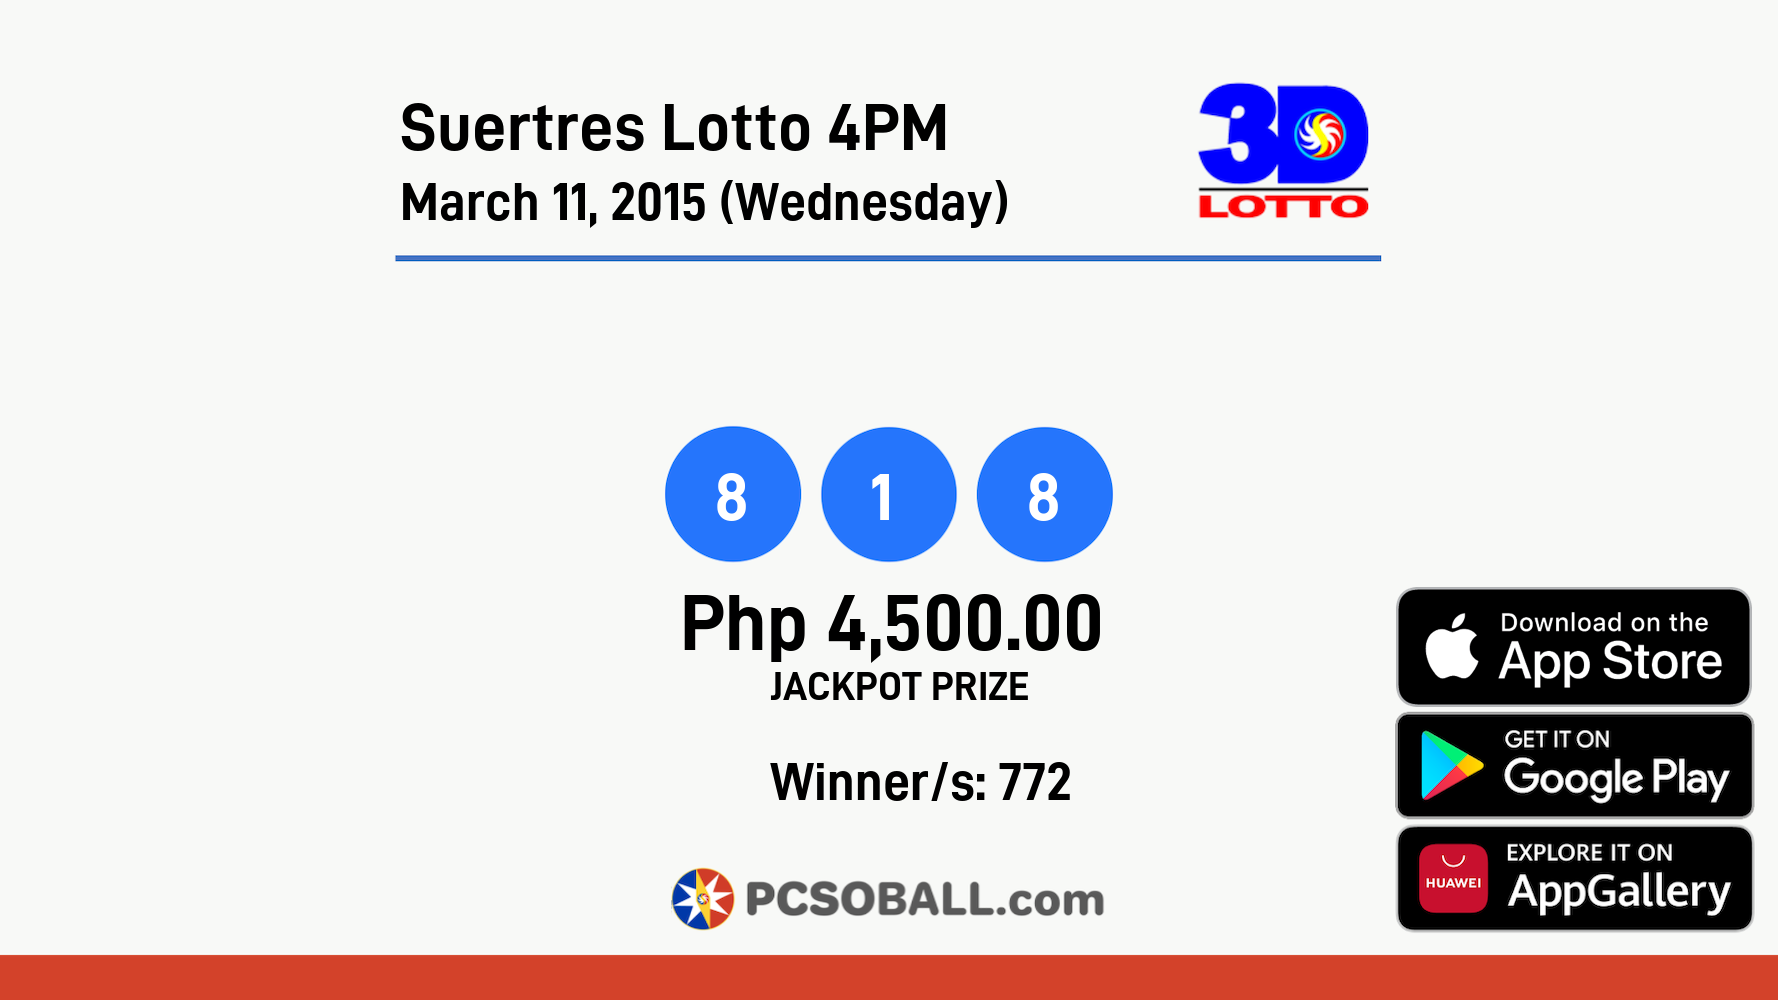 Suertres Lotto 4PM March 11, 2015 (Wednesday) Result